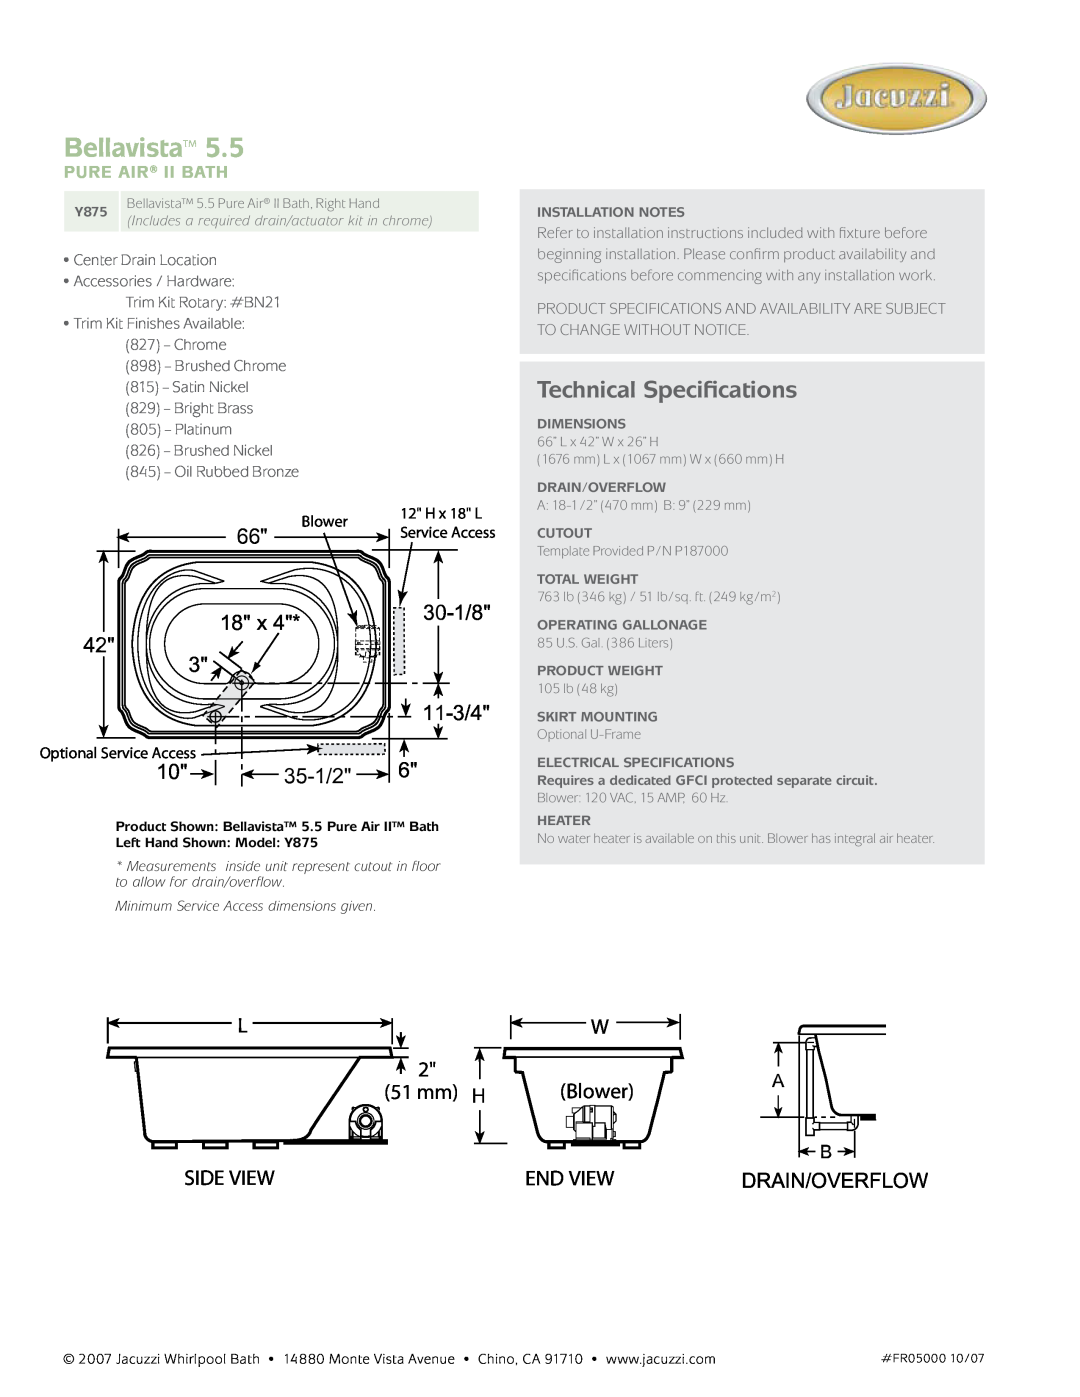 Jacuzzi Y875 - RH Refer to installation instructions included with fixture before, Brushed Nickel 845 - Oil Rubbed Bronze 